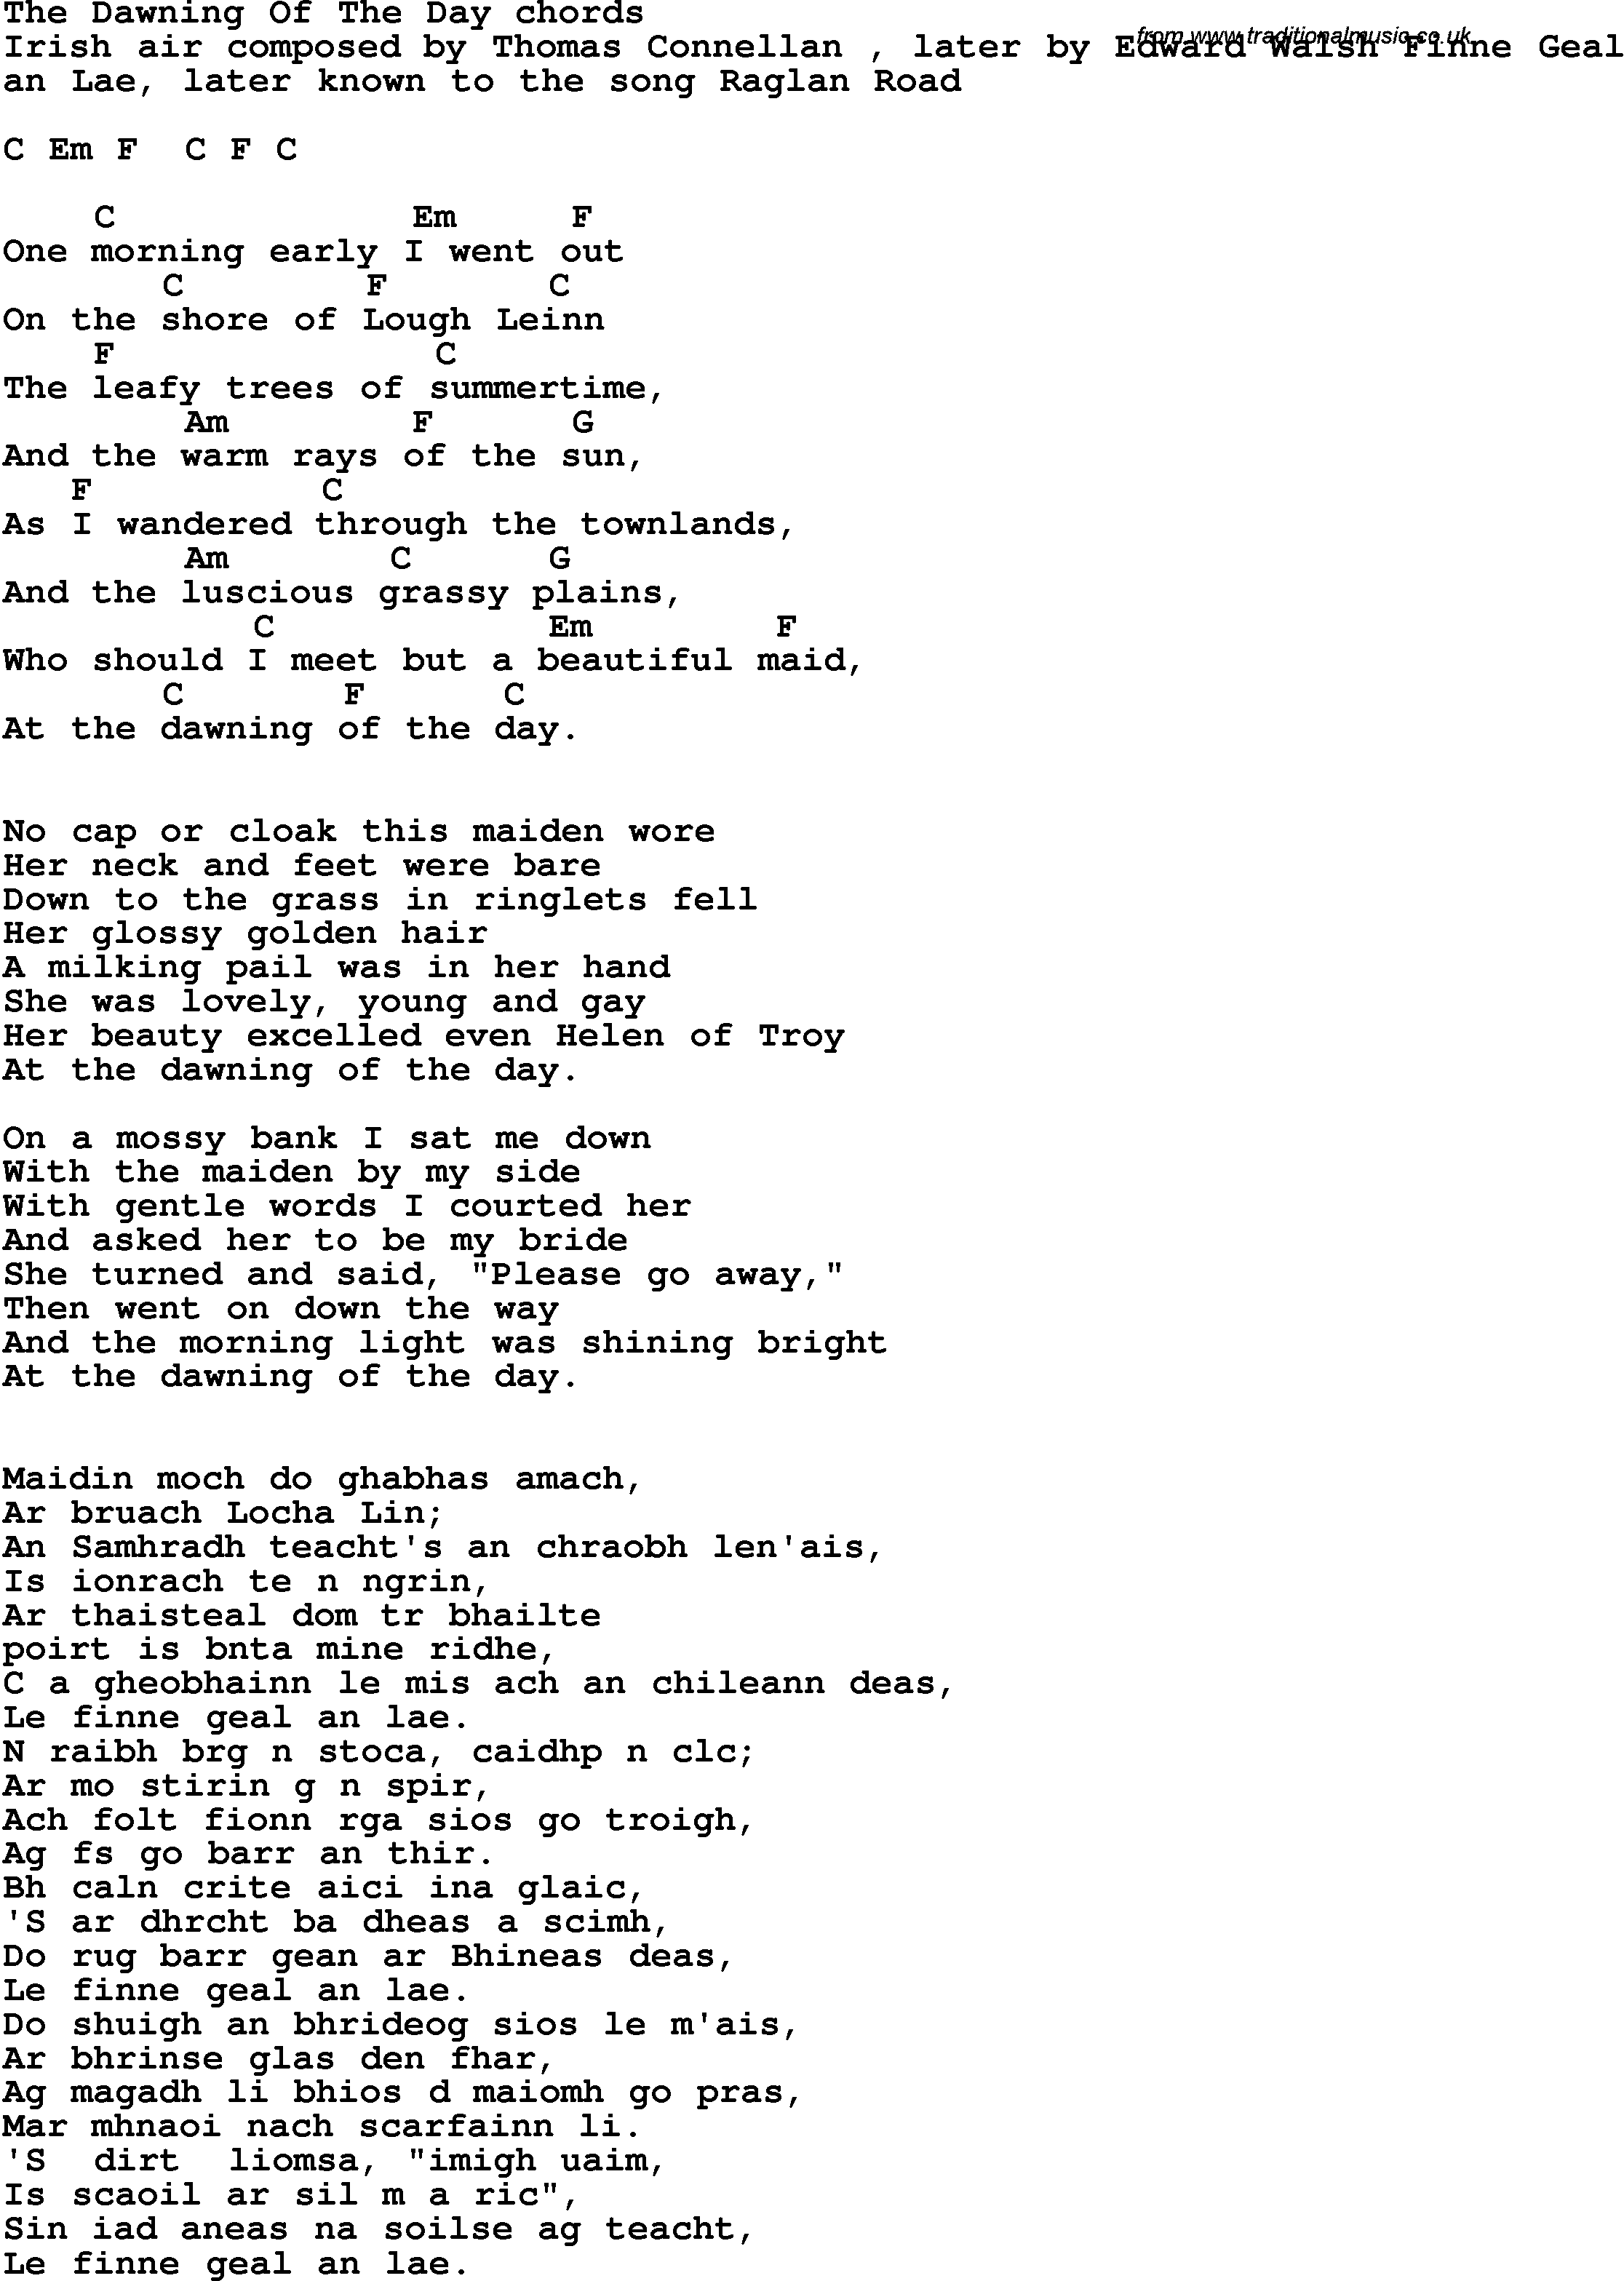 Song Lyrics with guitar chords for The Dawning Of The Day